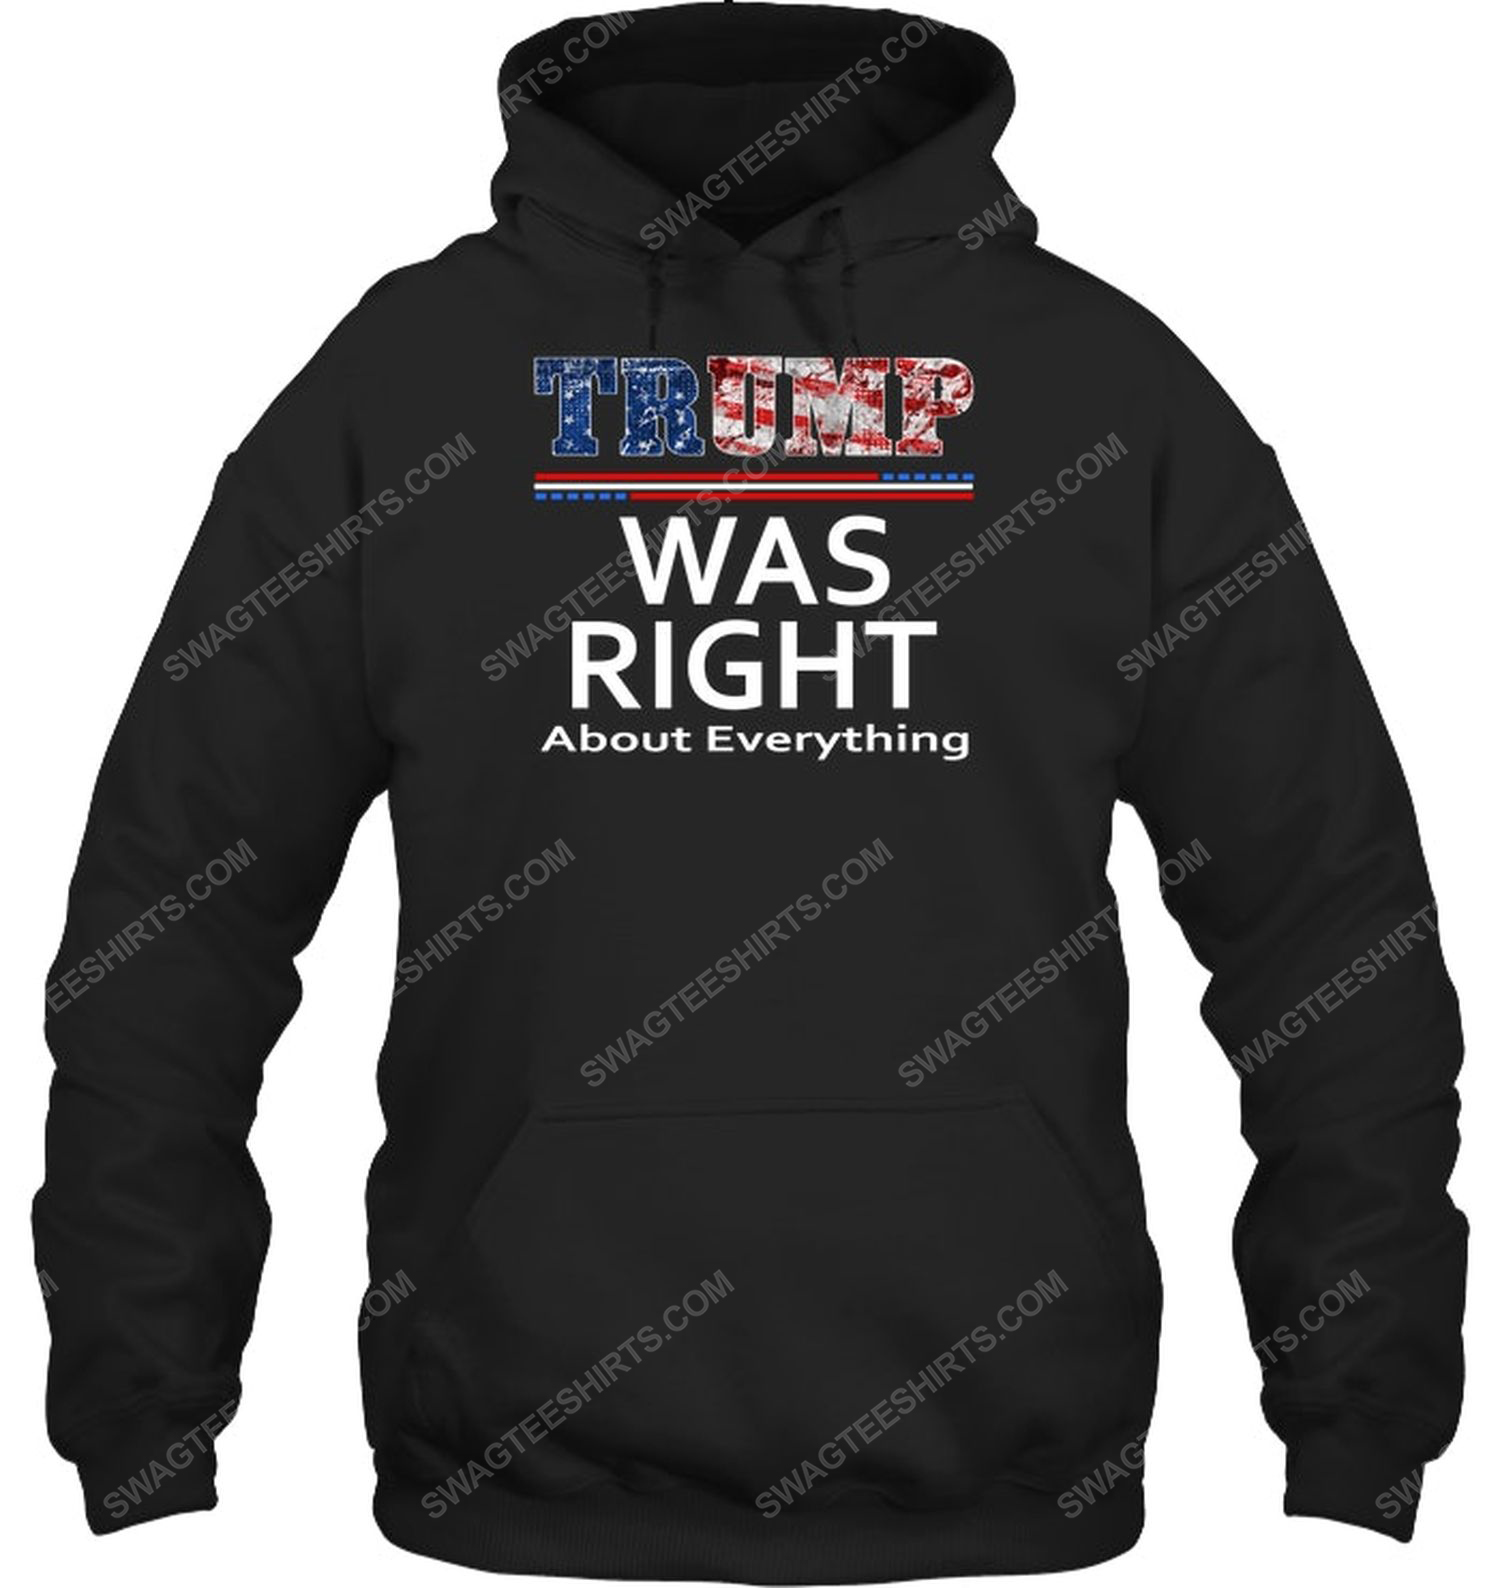 Trump was right about everything usa flag political hoodie